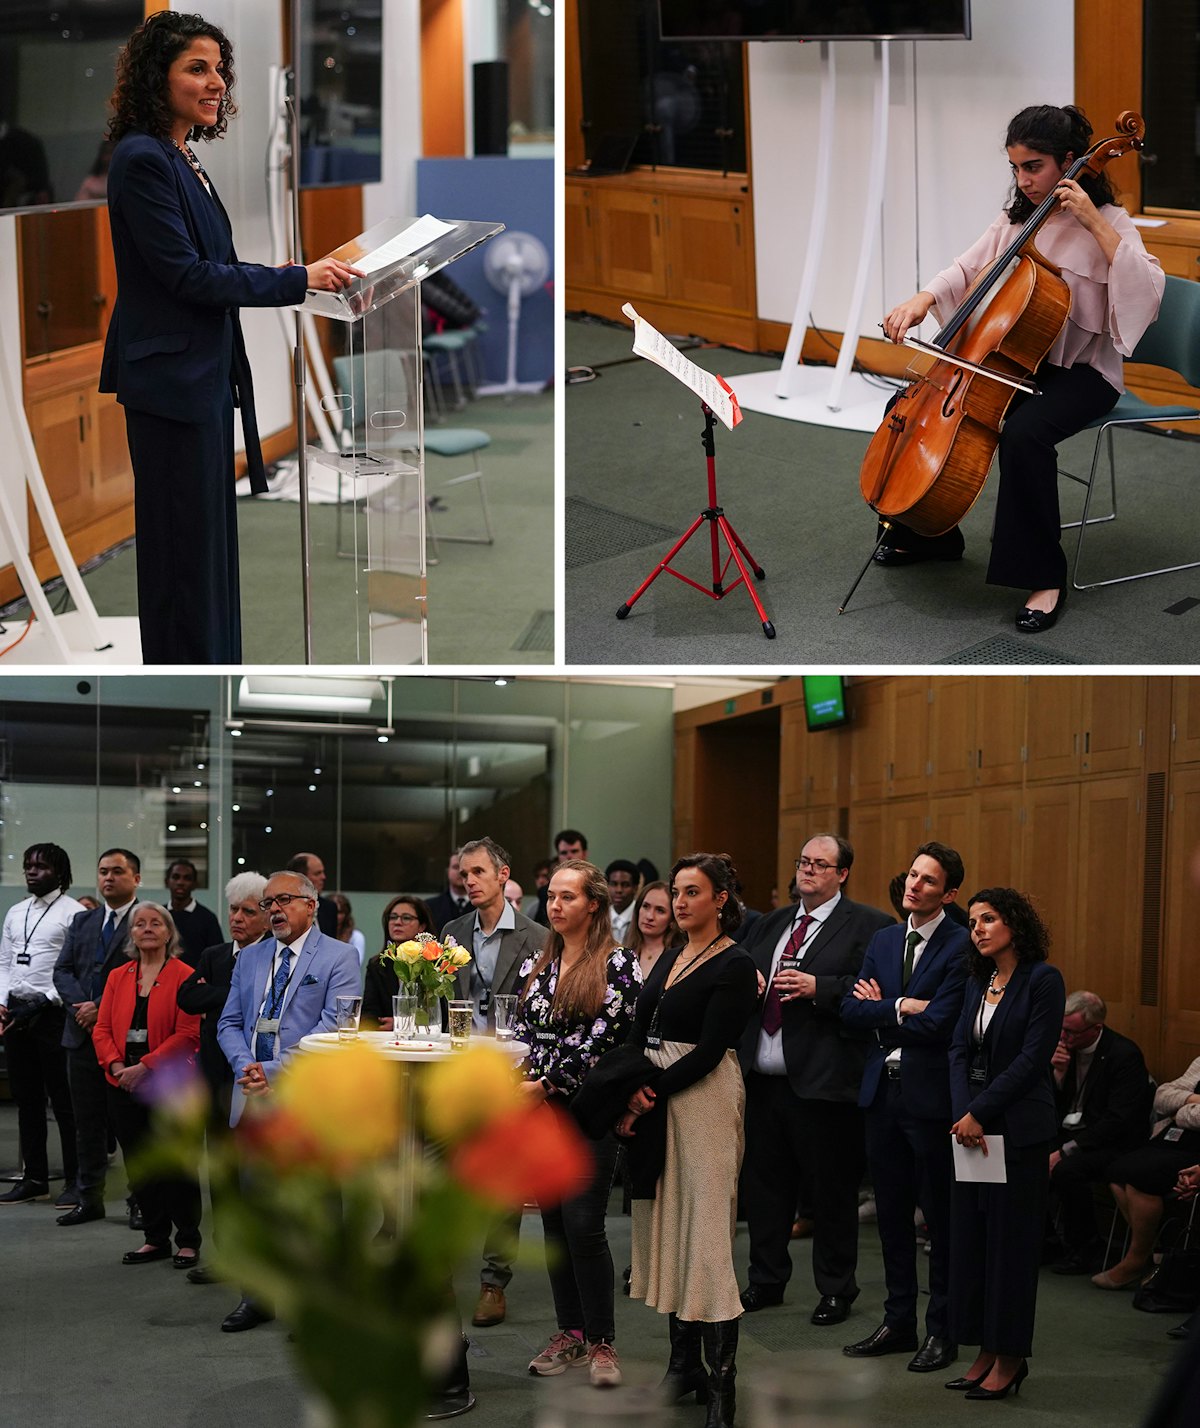 The reception featured artistic performances, as well as presentations about the efforts of the Bahá’ís of the United Kingdom to contribute to social progress.